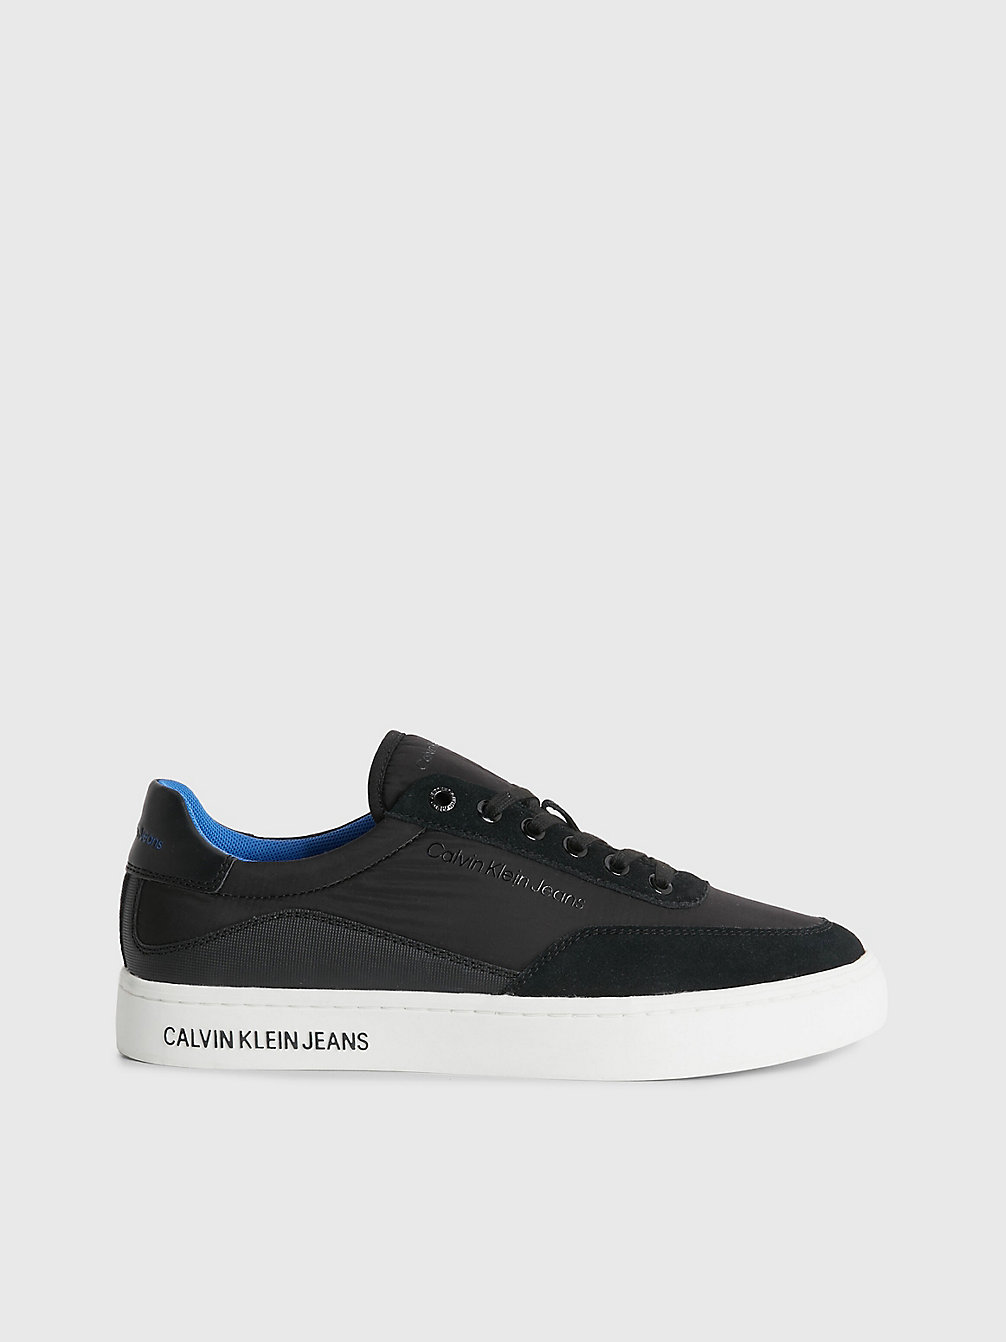 Sneaker Riciclate > BLACK/IMPERIAL BLU > undefined donna > Calvin Klein